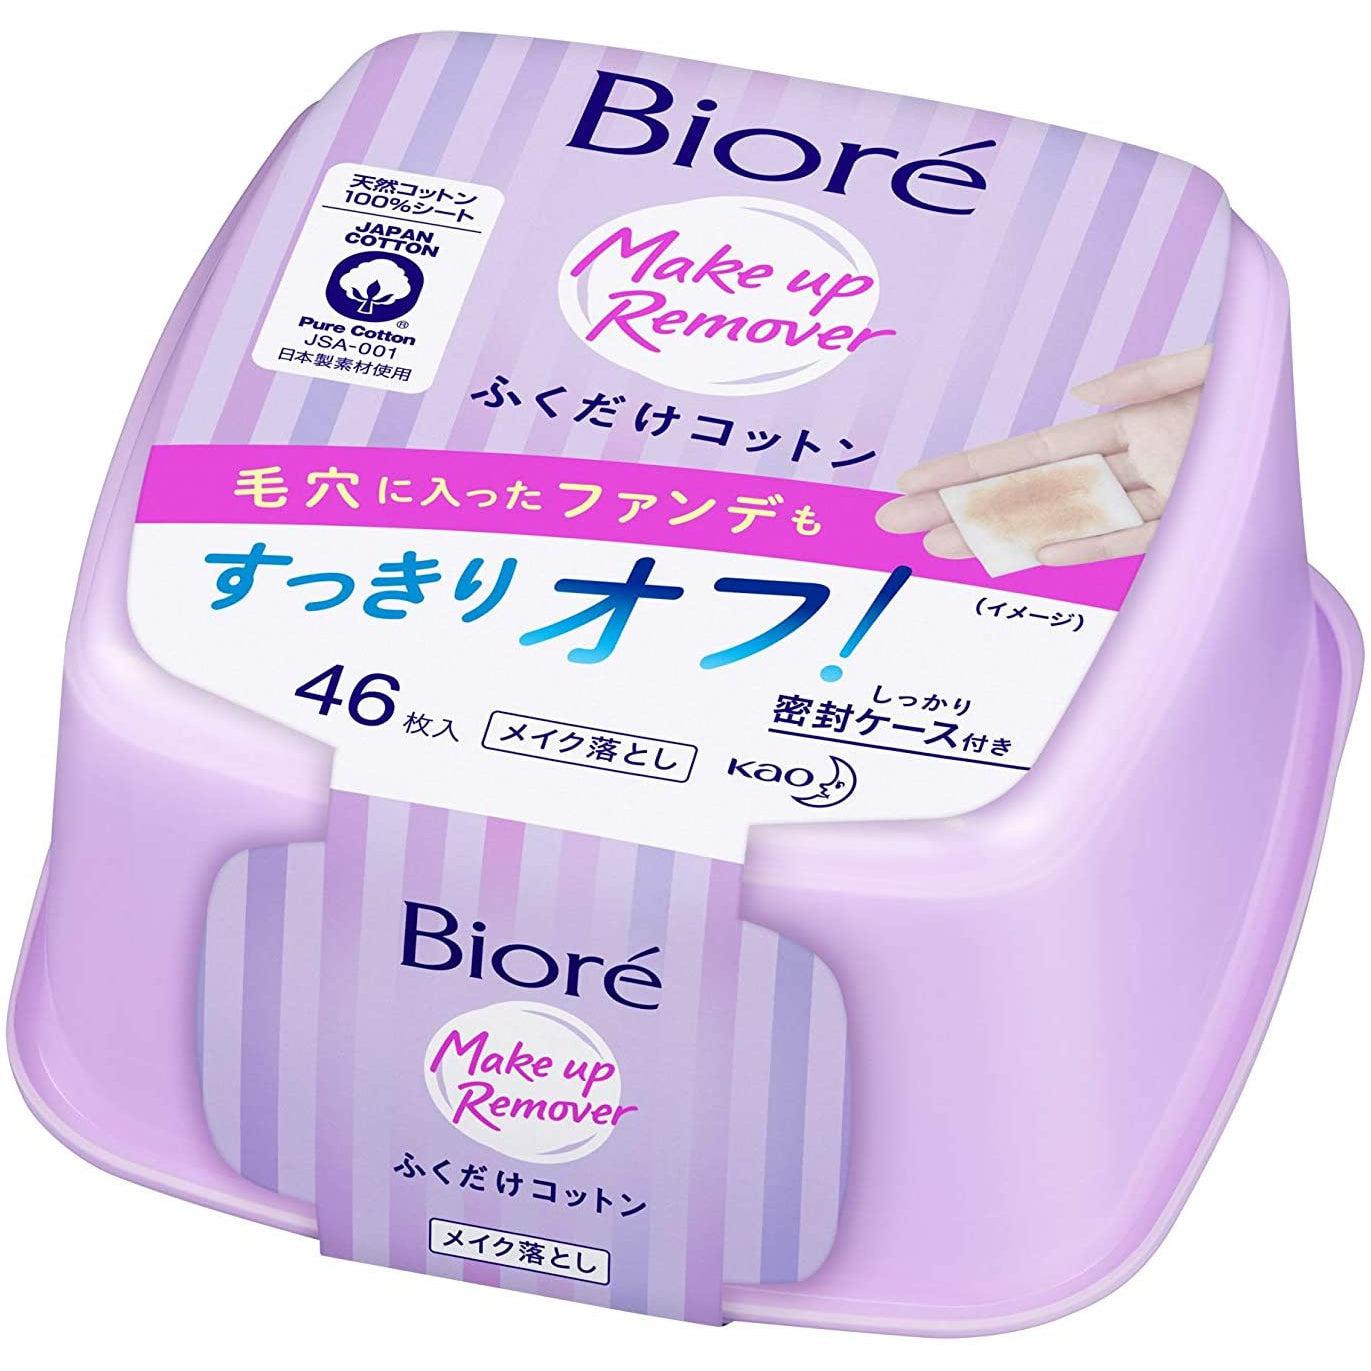 Kao Biore Makeup Remover Face Wipes 46 Sheets